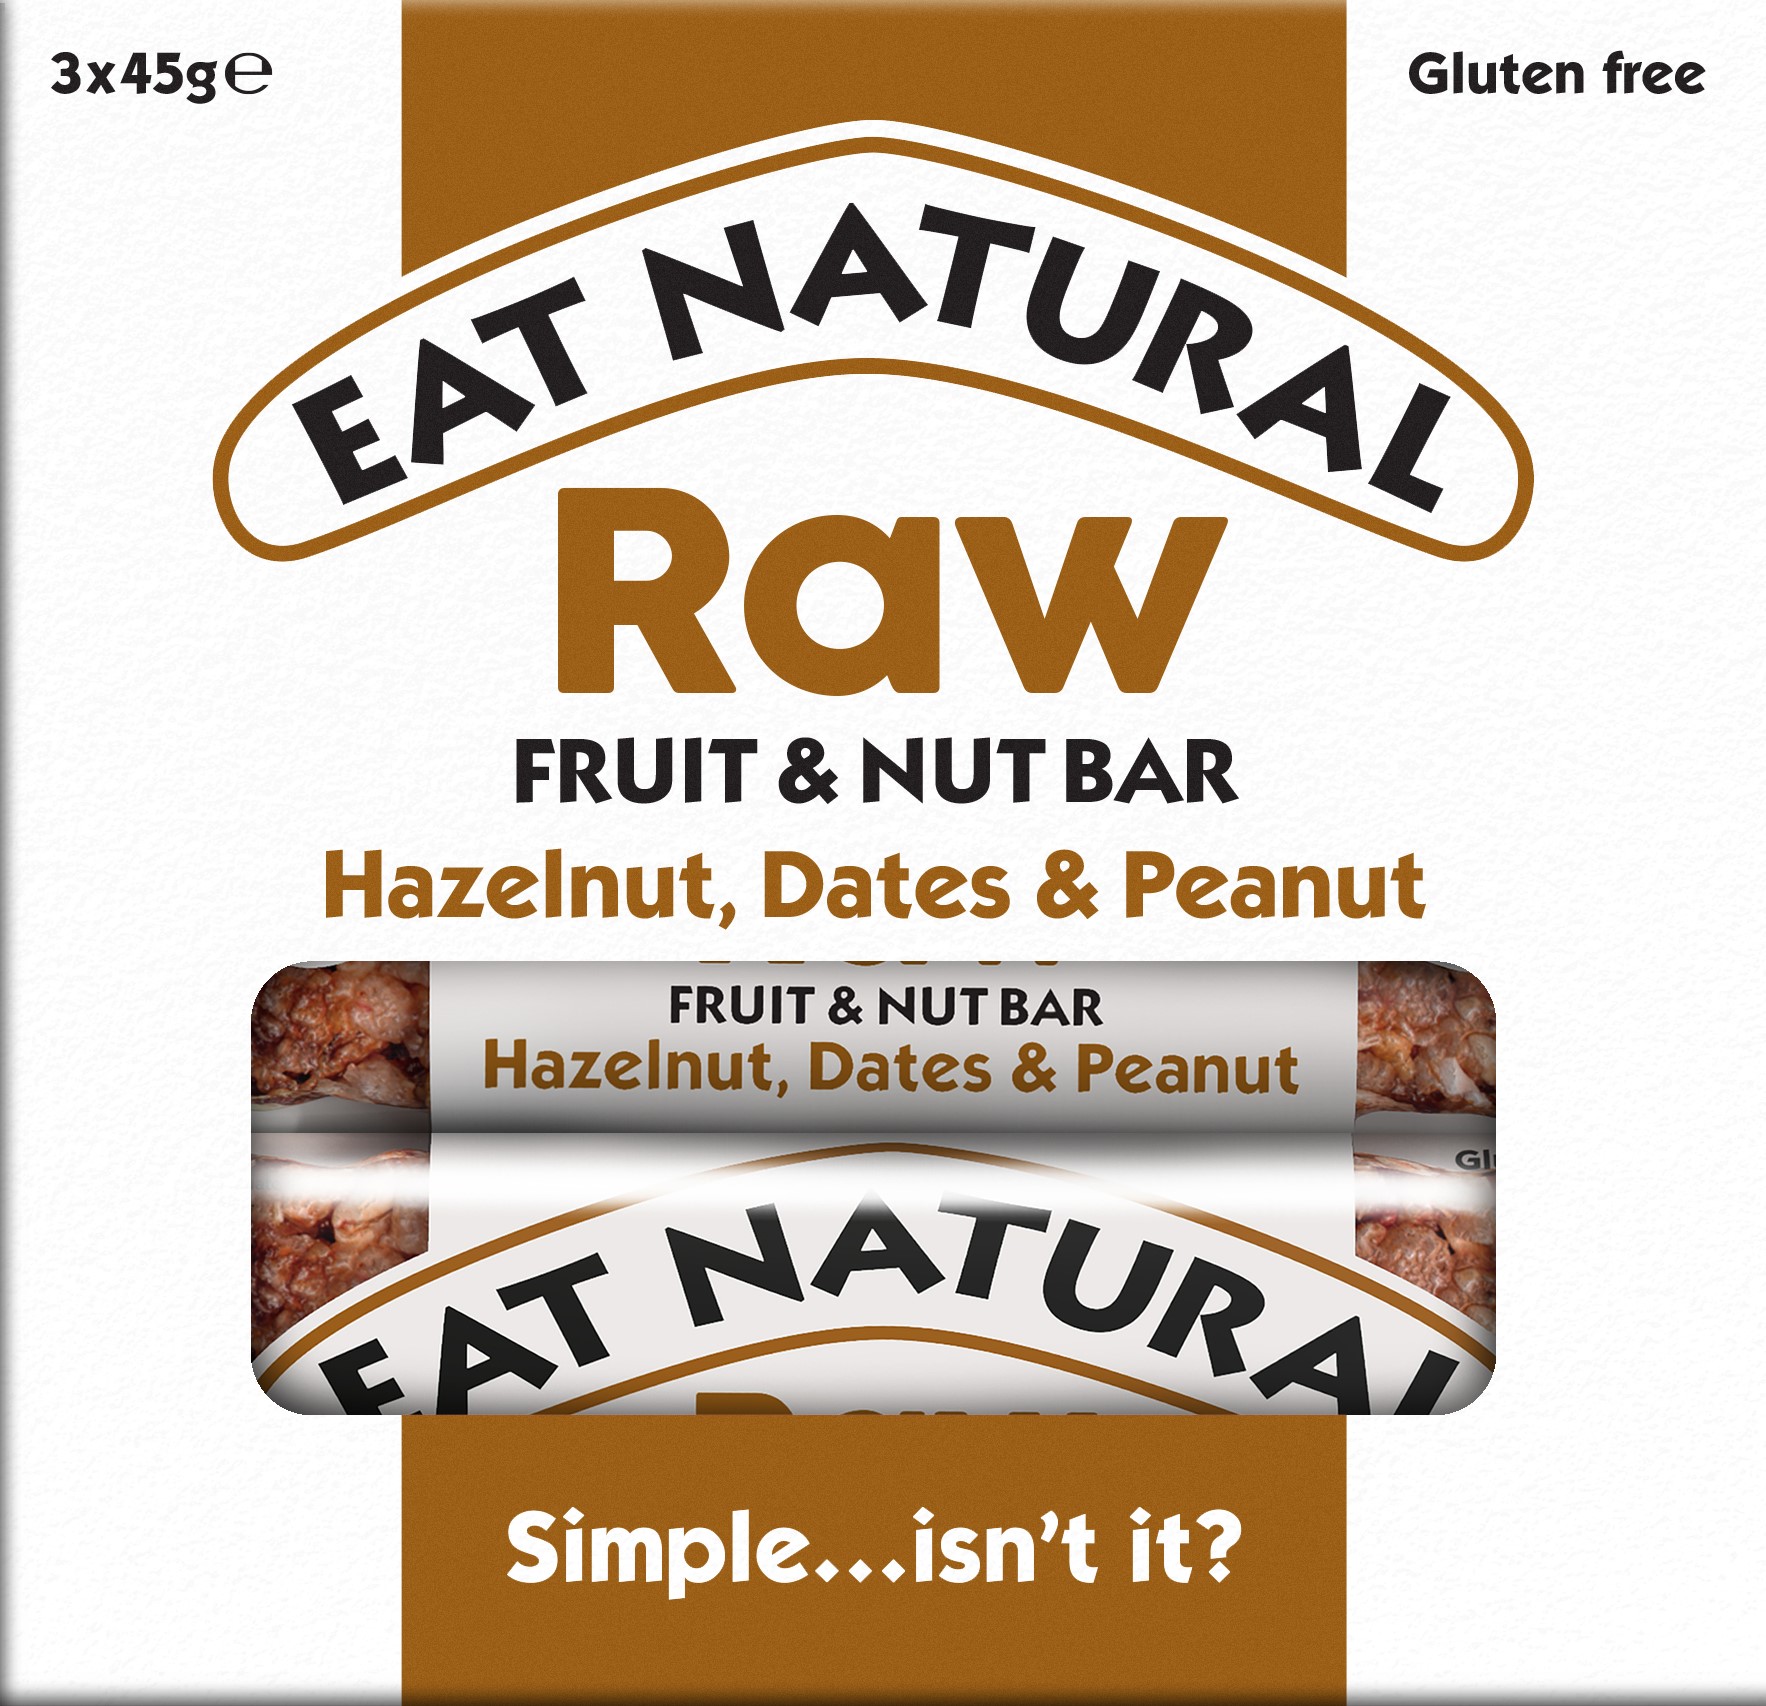 Eat Natural launches new raw range